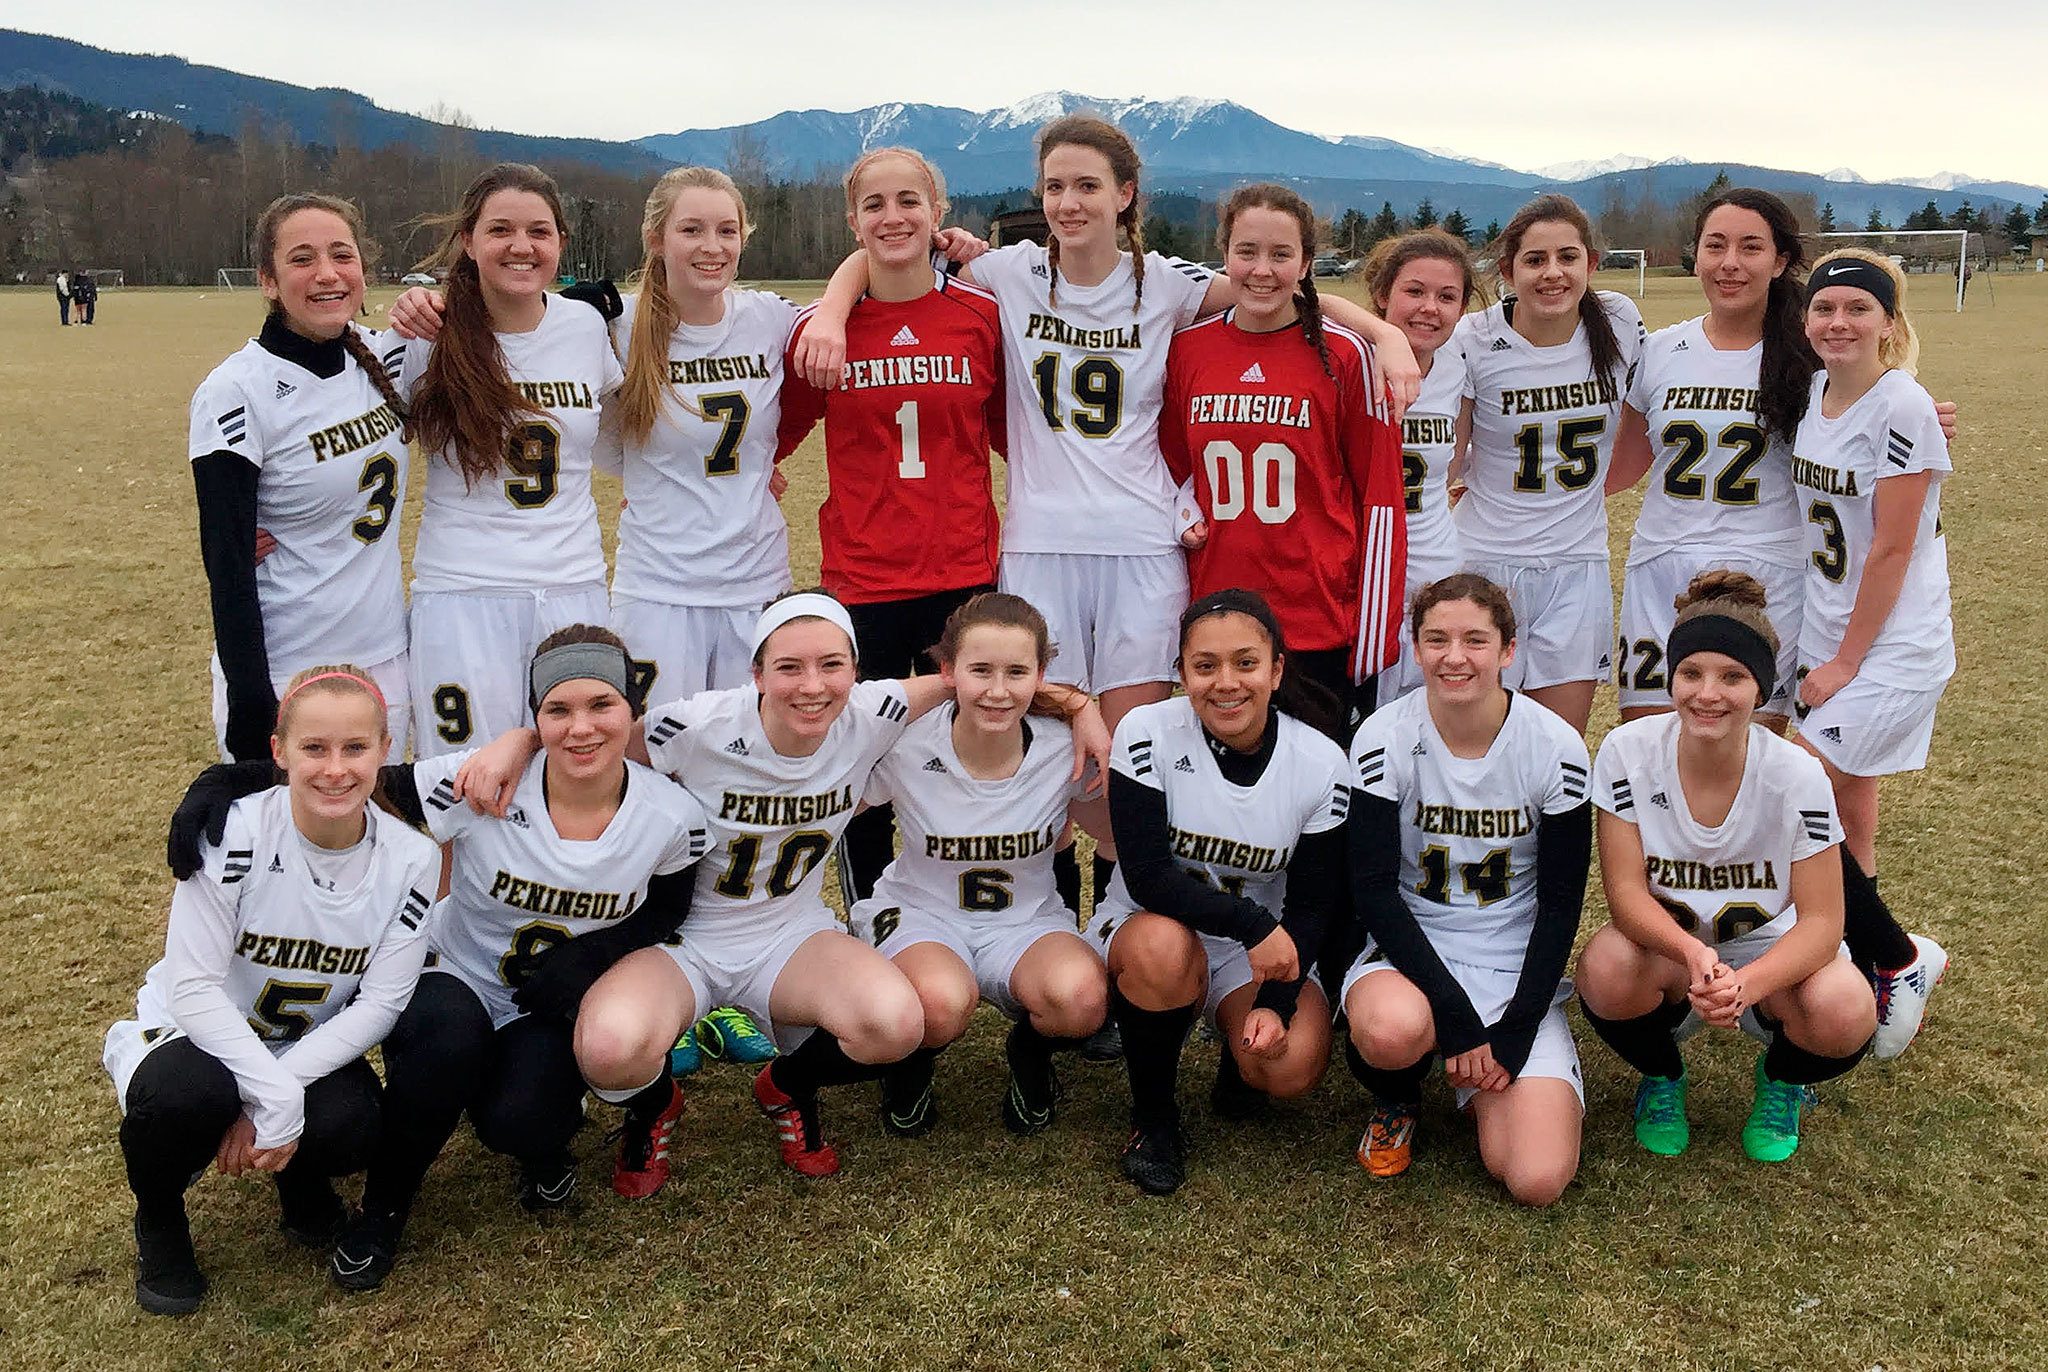 The Peninsula Soccer Academy includes, from back left, Yana Hoesel, Erin Vig, Kennedy Mason, Claire Henninger, Shanzi Cosgrove, Bonnie Sires, Nicole Heaton, Lola DelGuzzi-Flores, Oliver Barrett and Alivia Carvell, with from front left, Sierra Robinson, Annika Carlson, Leah Haworth, Delaney Wenzl, Nathalie Torres, Claire Payne and Peyton Heft. Submitted photo